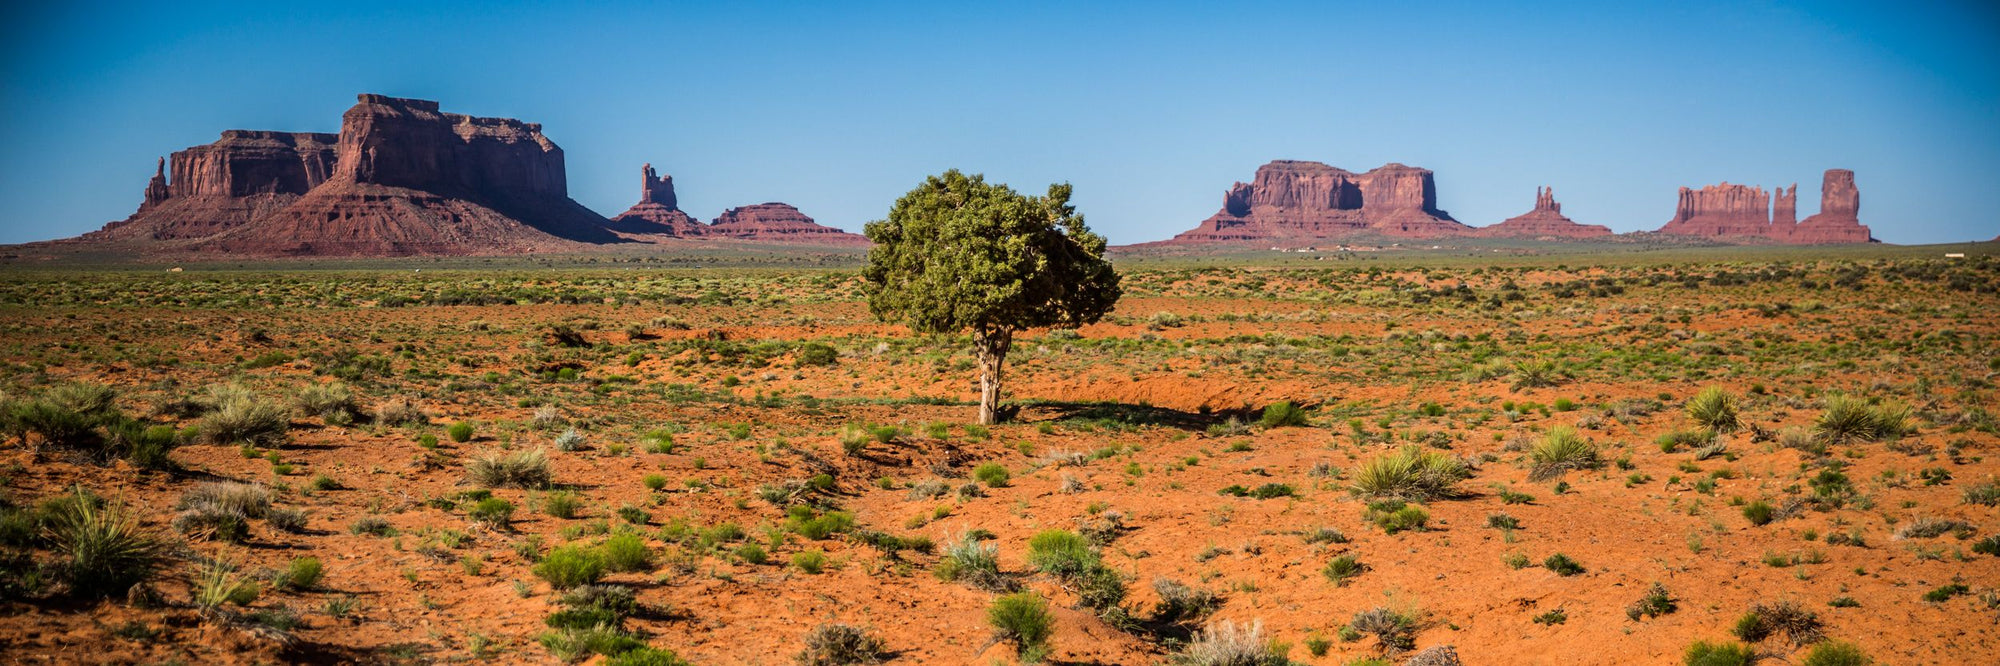 A desert landscape surrounds a lone tree as red monuments jut from the ground.